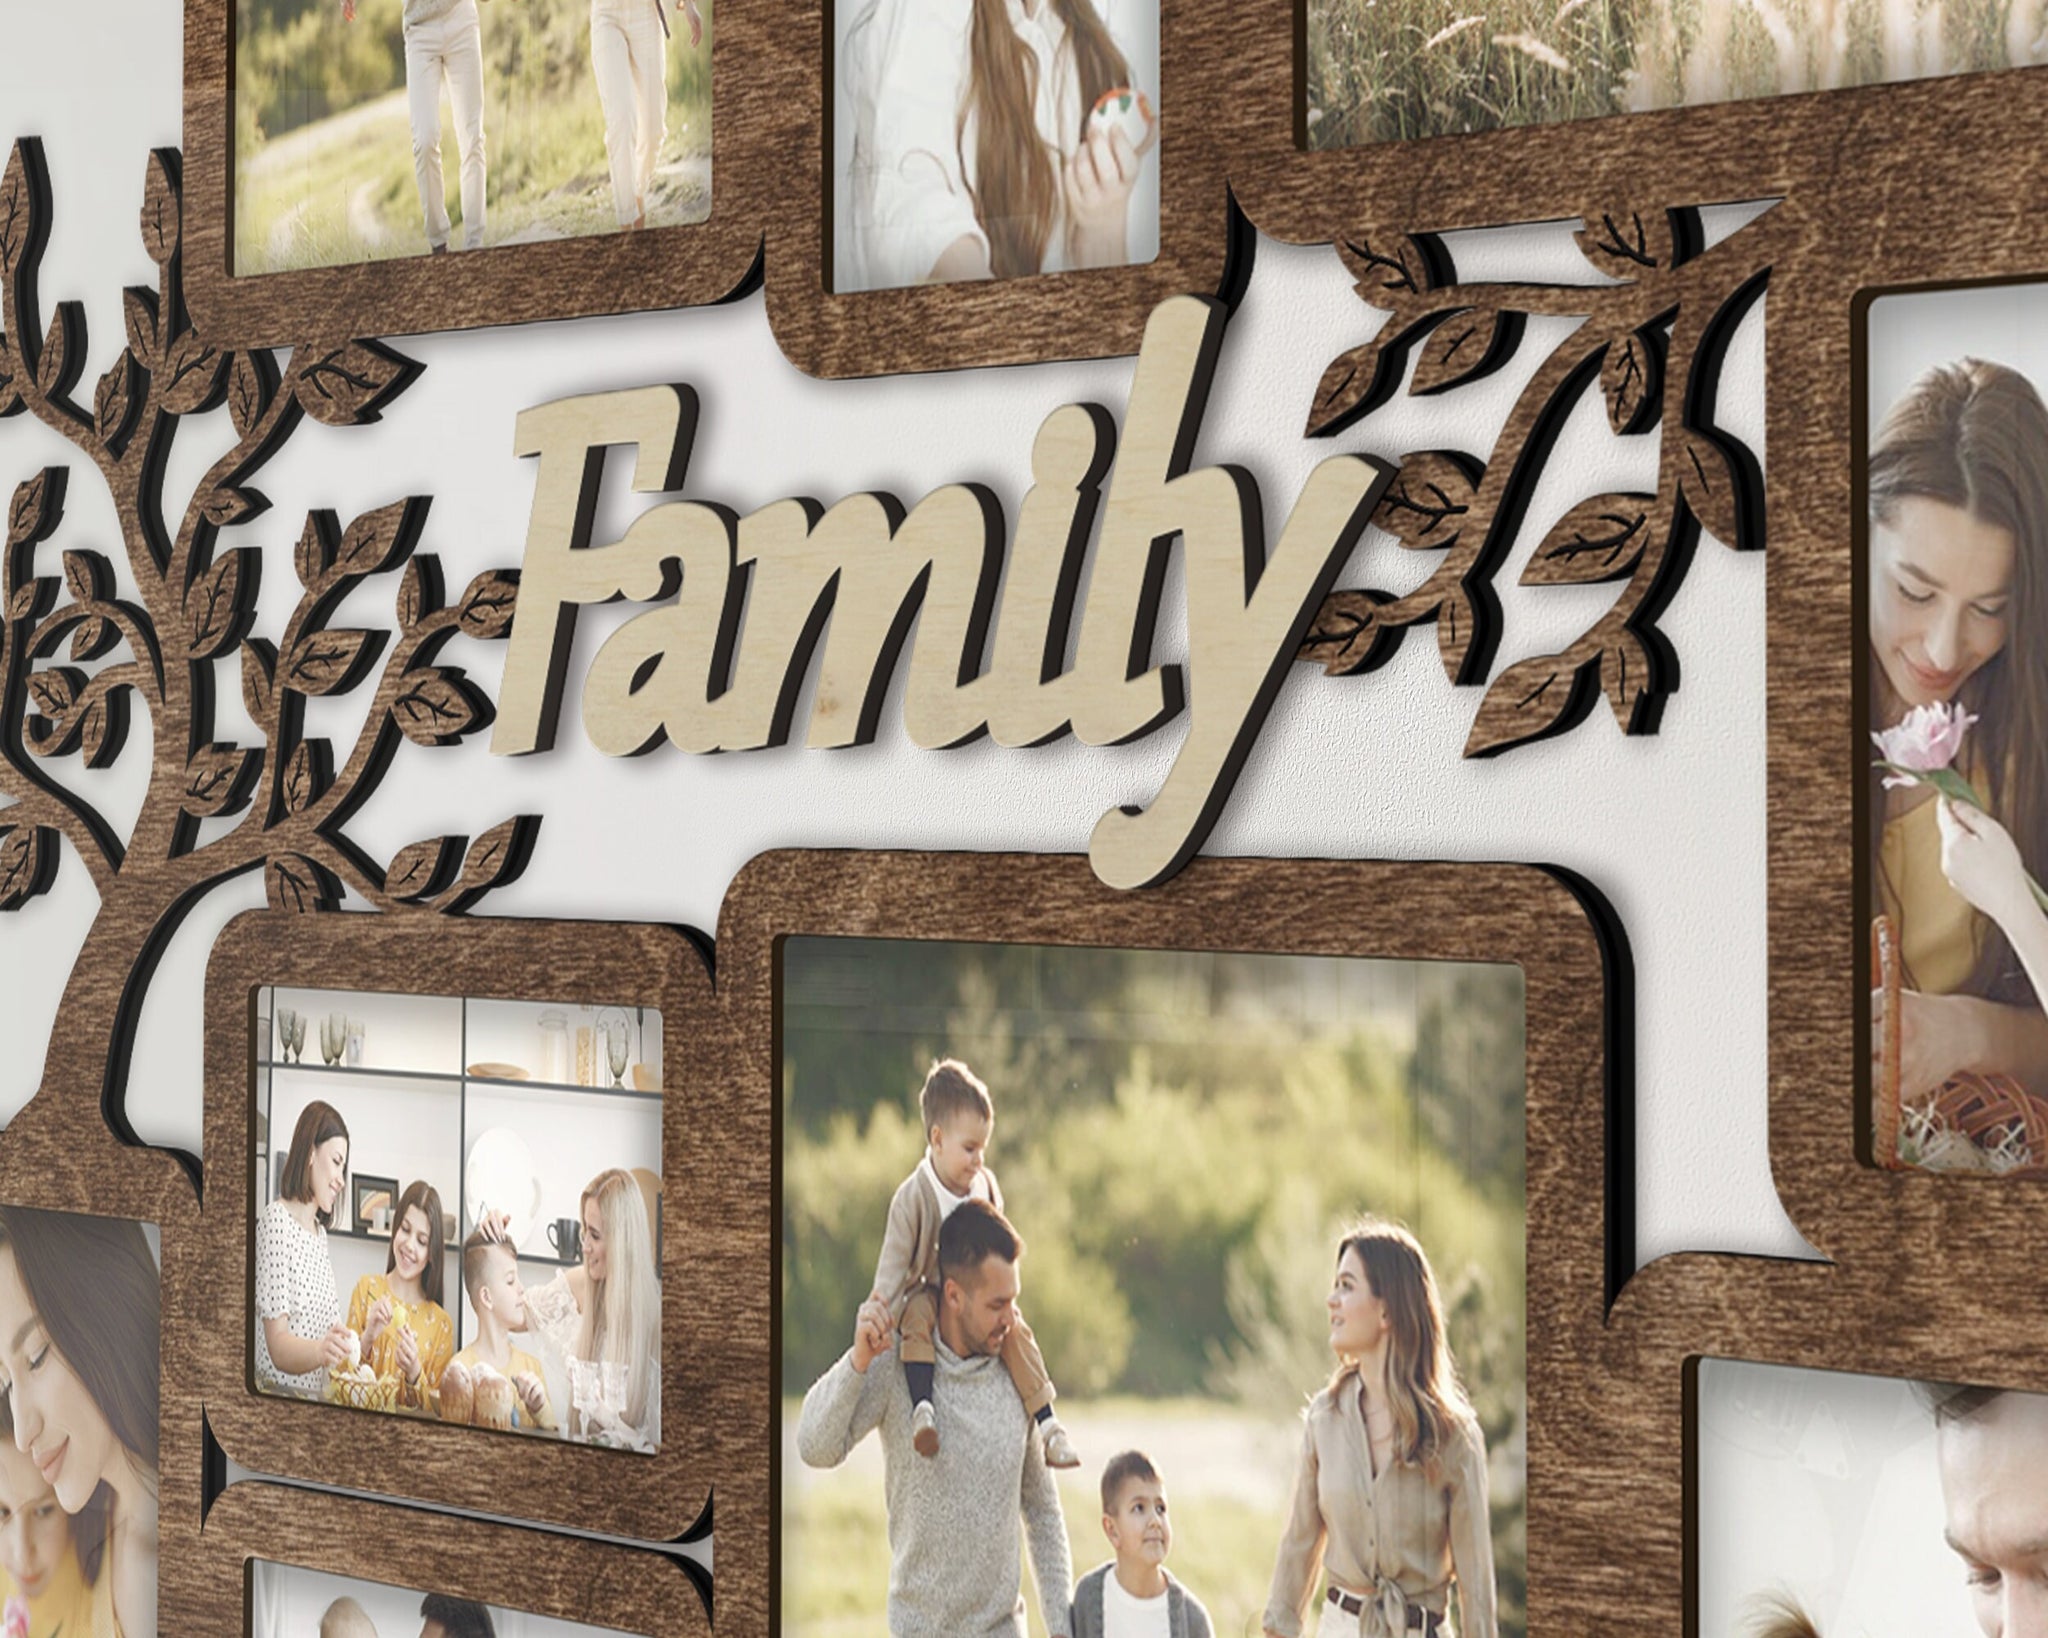 Family picture frame collage Multi photo frame Family sign 4x6 picture –  The Frame Depot